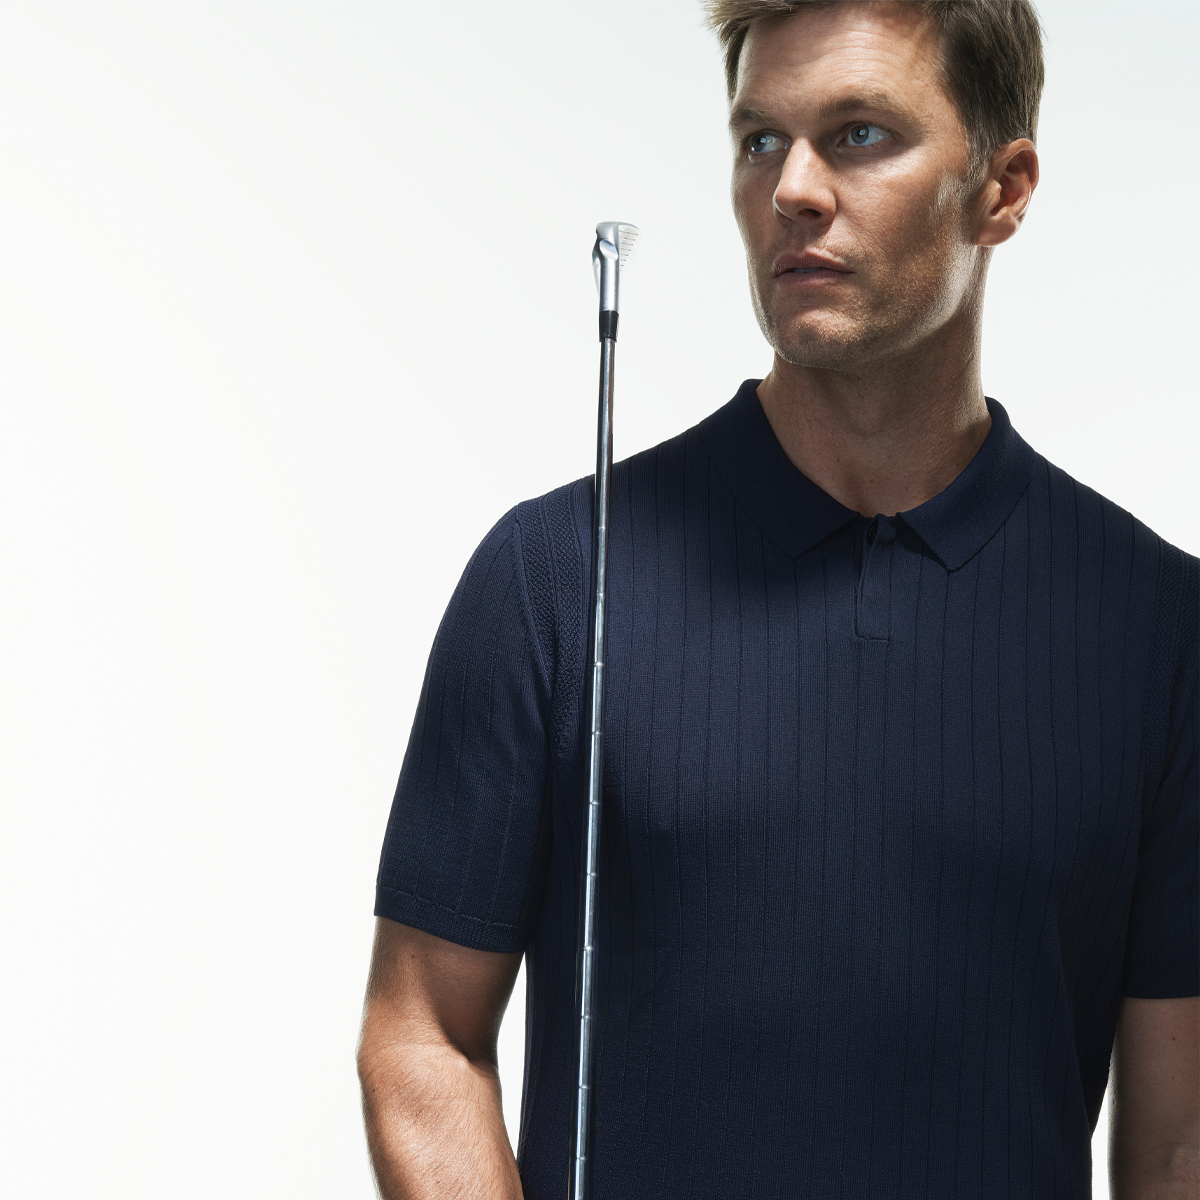 NFL Star Tom Brady Launched a Golf Collection